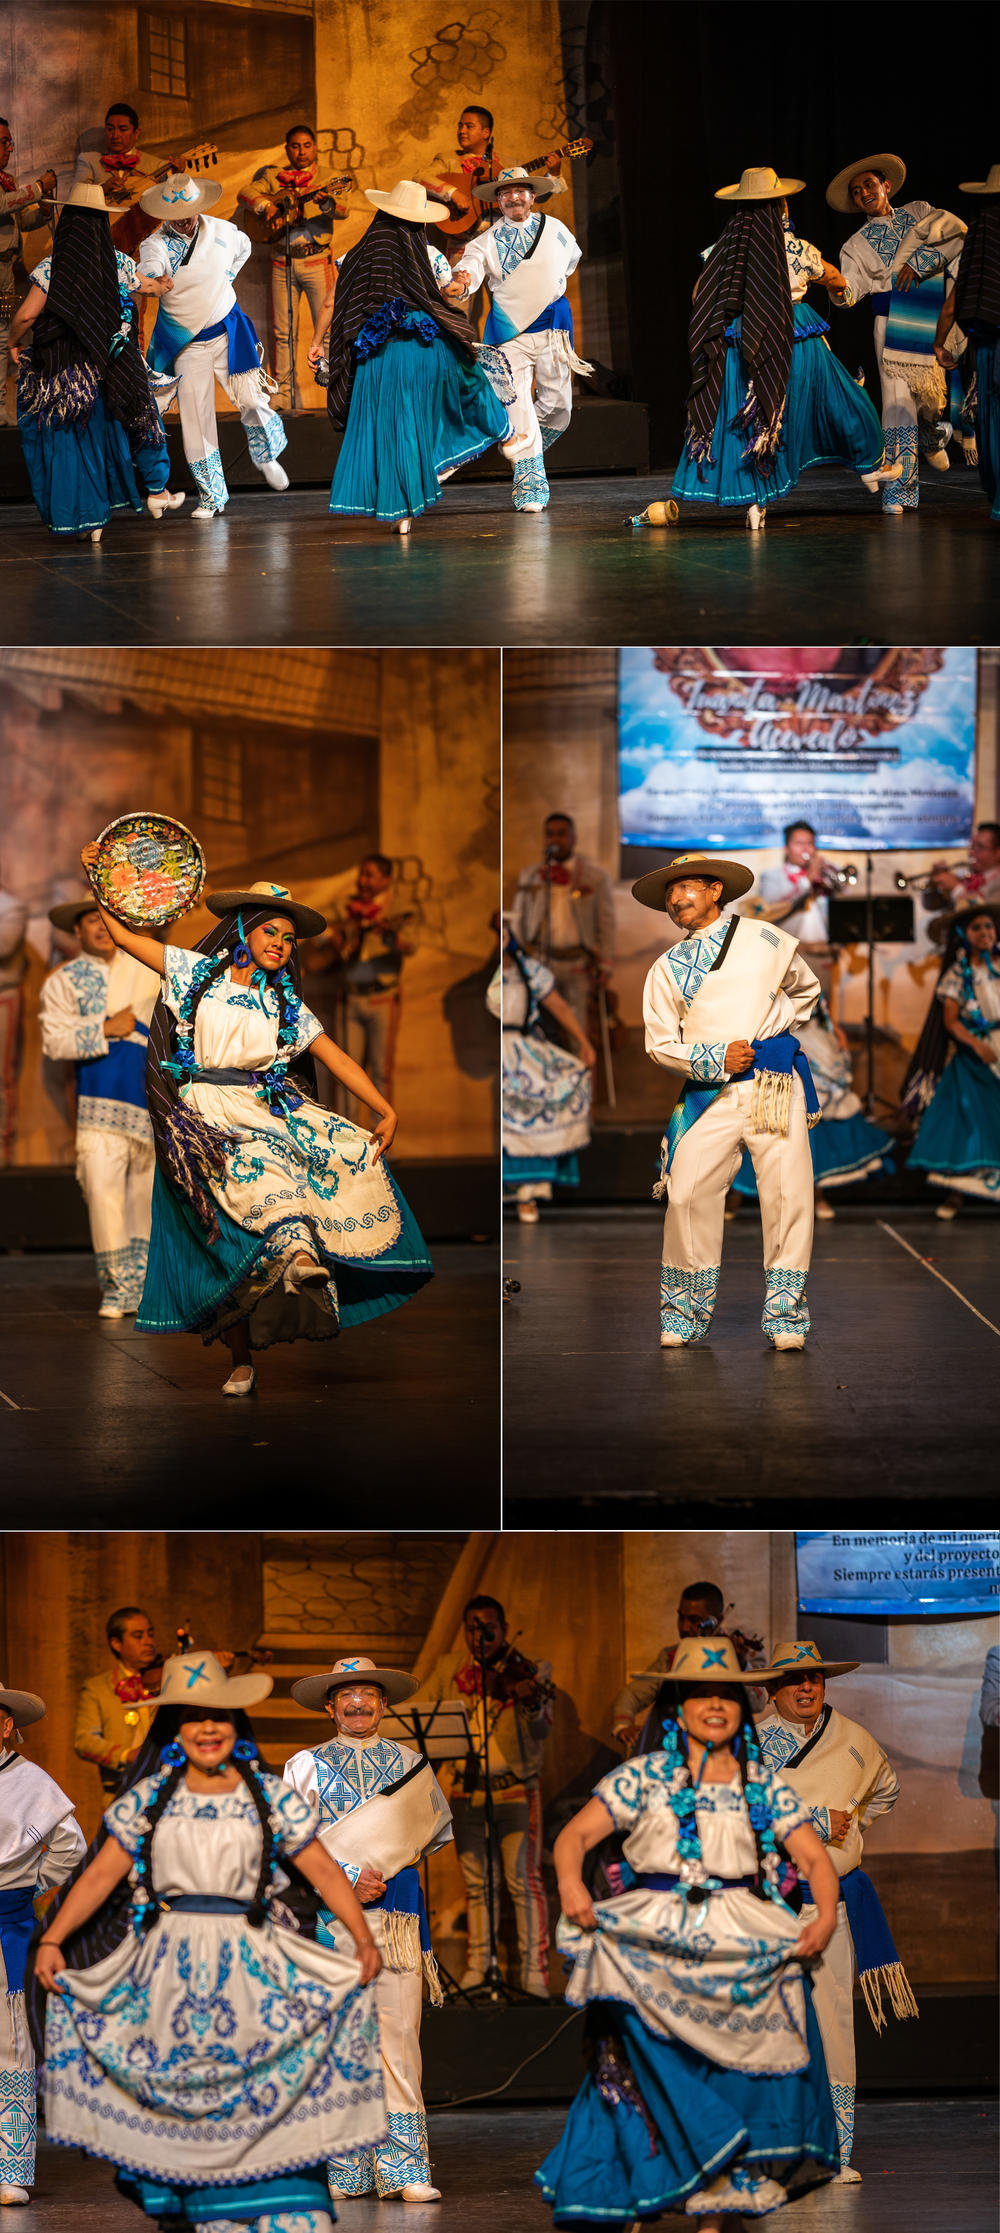 Tio Sergio performs a regional dance from Michoacán with his group members at México City's Teatro Ferrocarrilero Gudelio Morales in July.